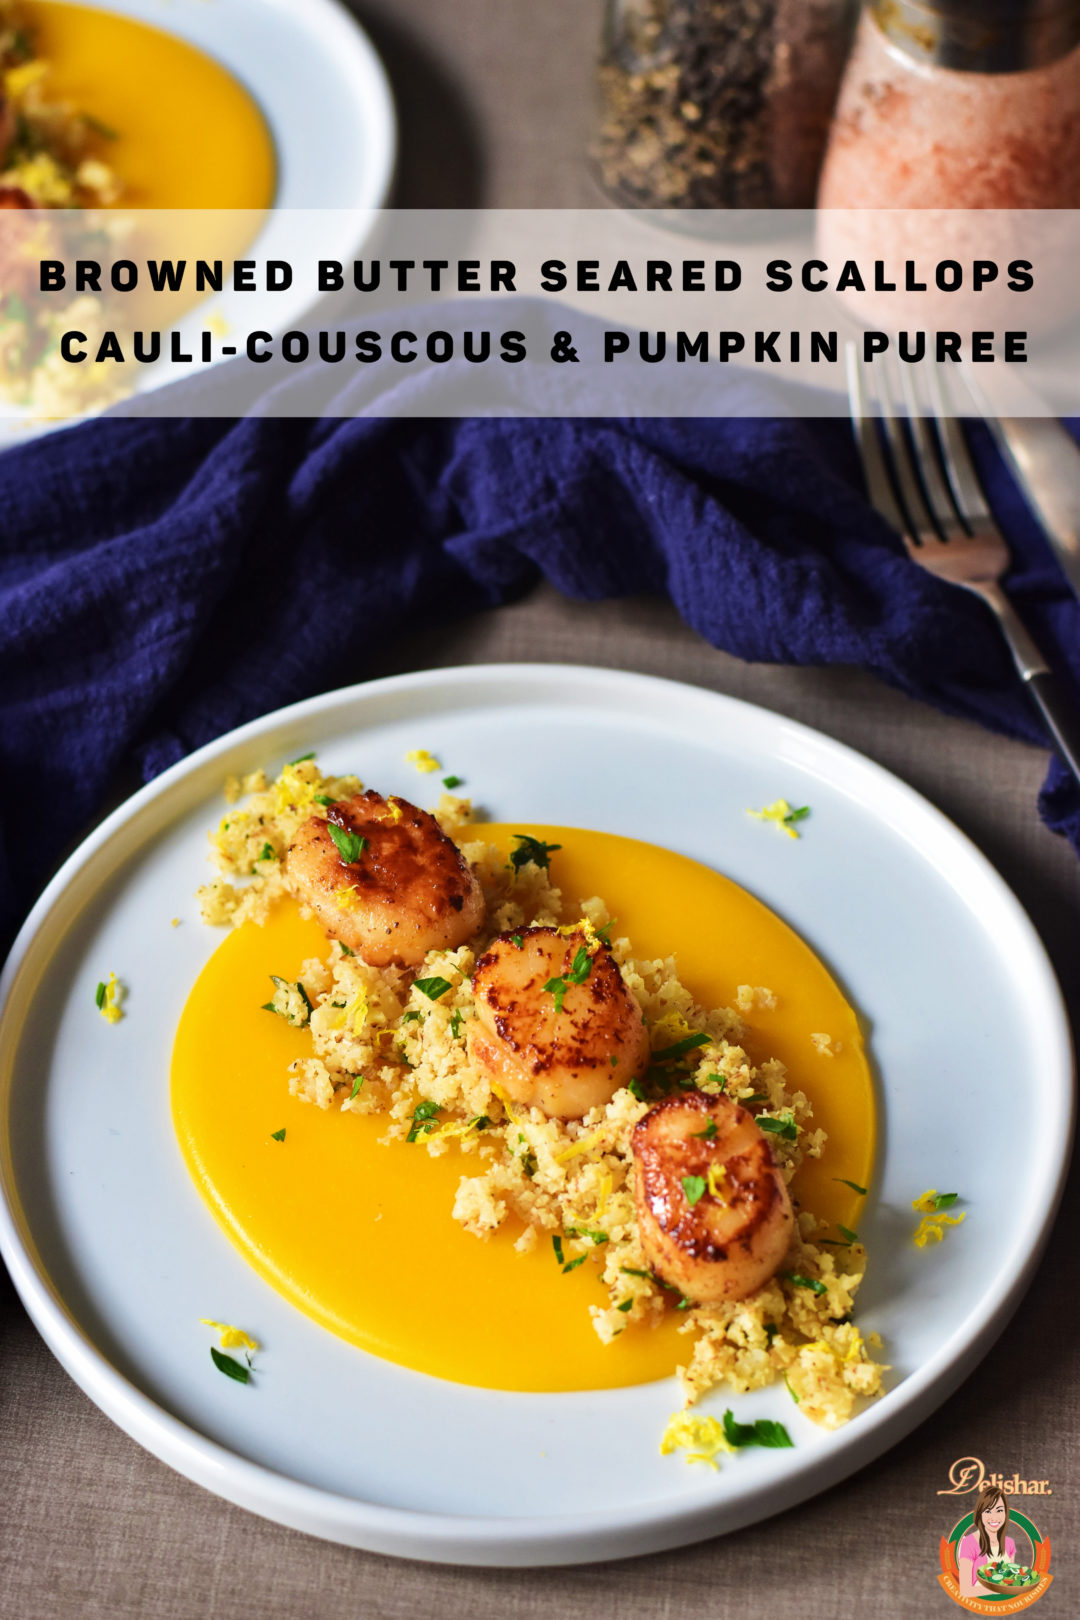 Browned Butter Seared Scallops with Cauli-couscous & Pumpkin Puree ...